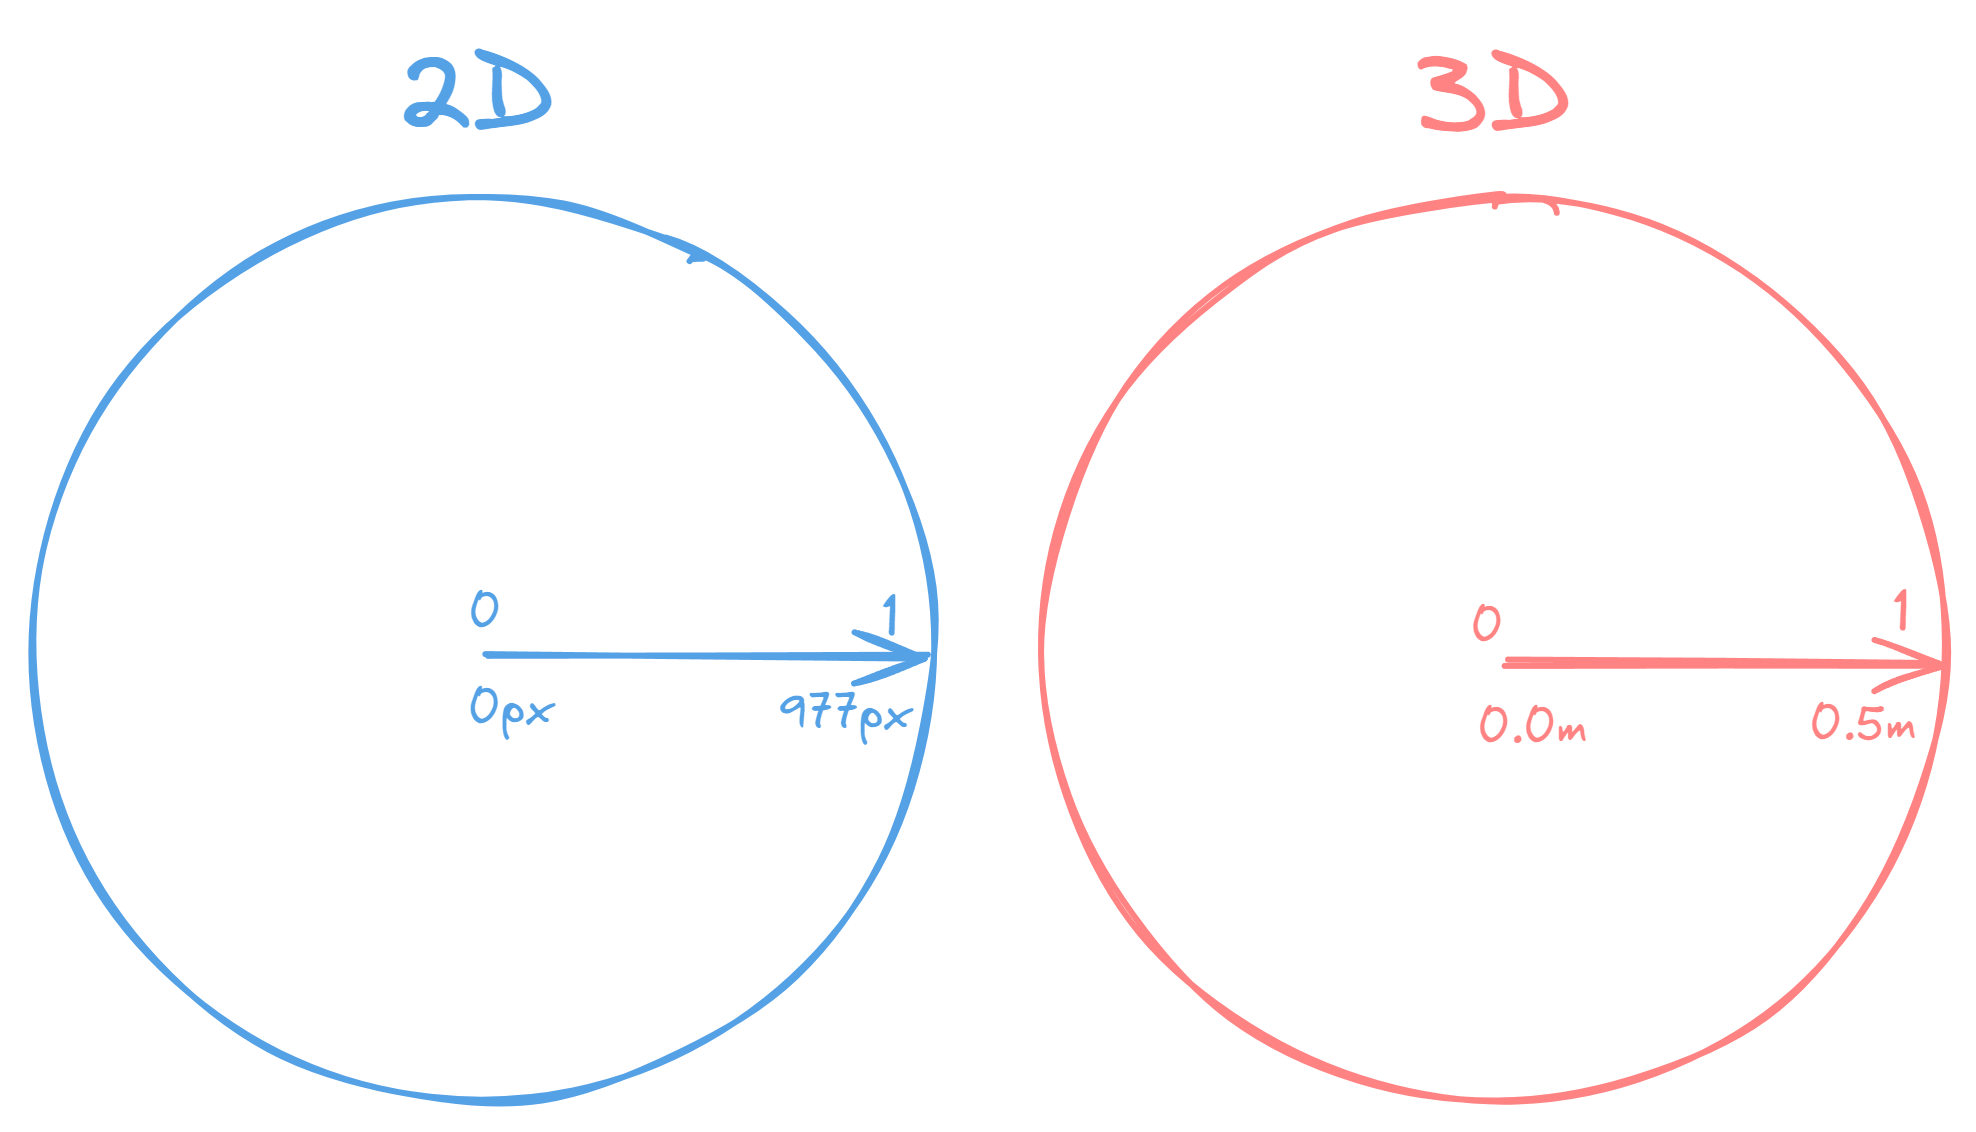 Drawing of two circles with a label on top: 2D over the left one and 3D over the right one. An arrow extends from the center of each circle pointing towards the outer boundary. A 0 is placed on top of the arrow at the center of both circles, and a 1 is positioned at the end of the arrow. Beneath the arrow, the distance is indicated as 0px from the left circle's center and 977px at the end of the arrow. For the right circle, the measurements are 0.0m at the center and 0.5m at the end of the arrow.